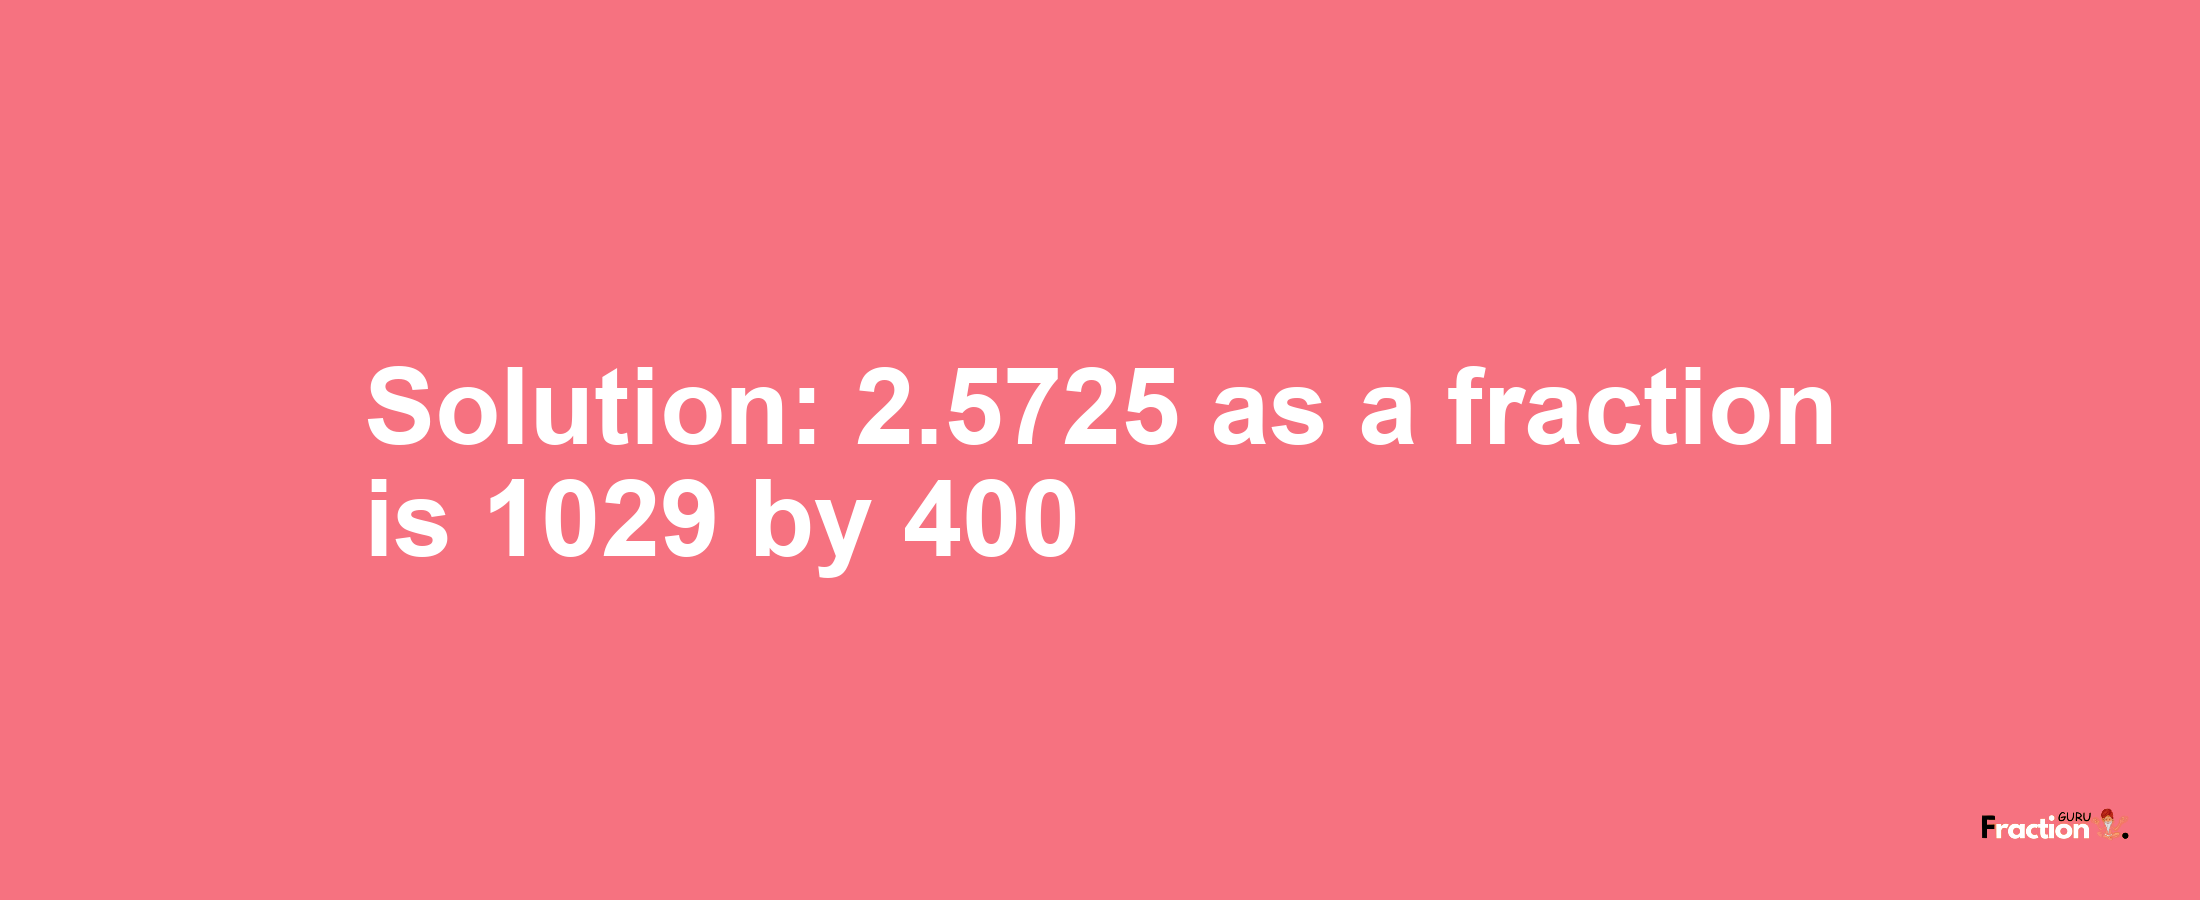 Solution:2.5725 as a fraction is 1029/400